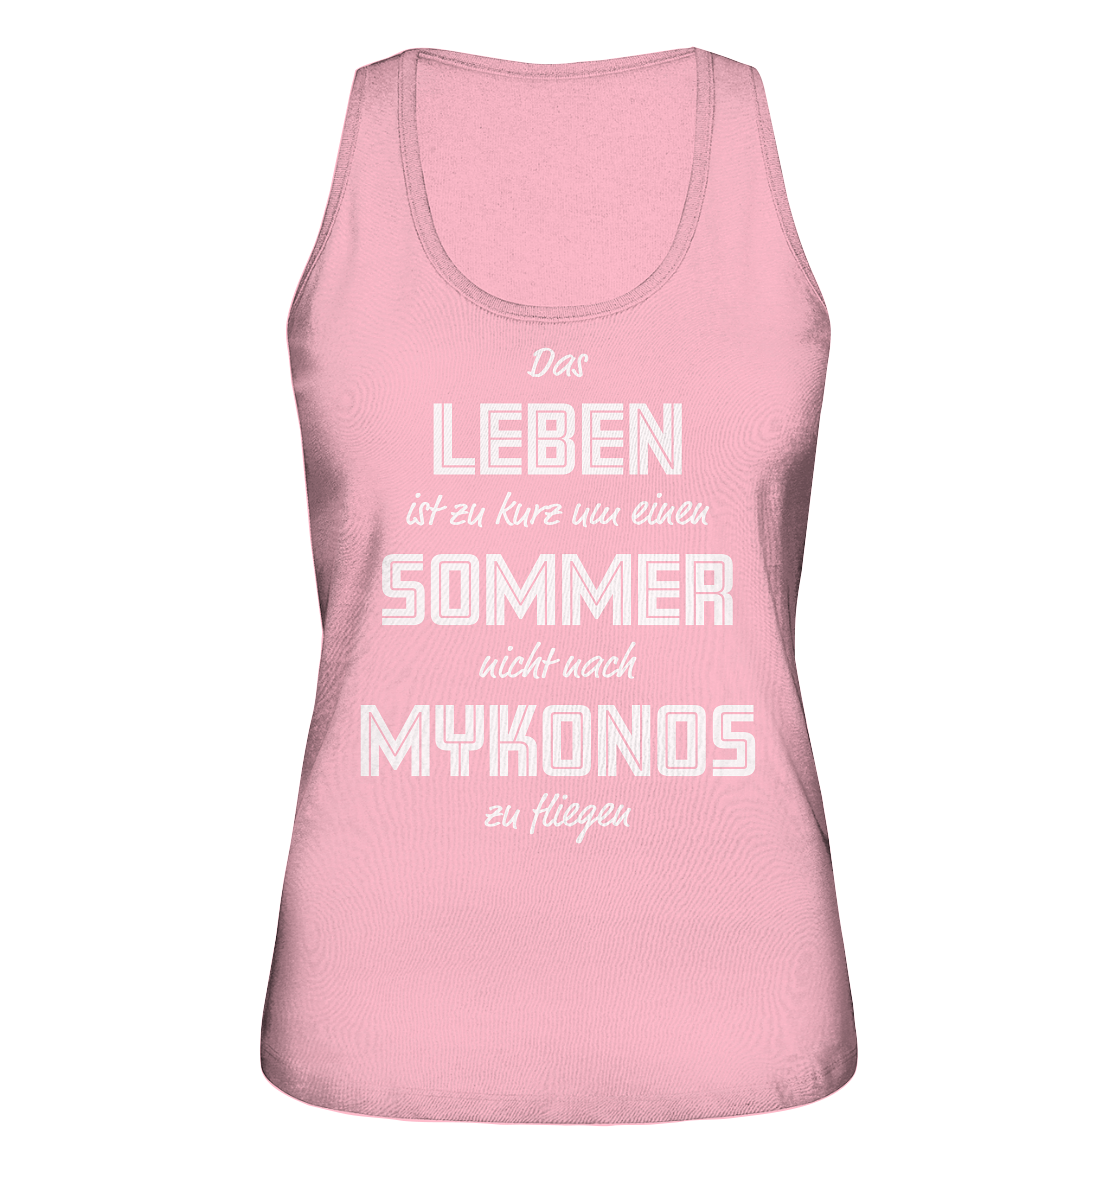 Life is too short not to fly to Mykonos for a summer - Ladies Organic Tank Top